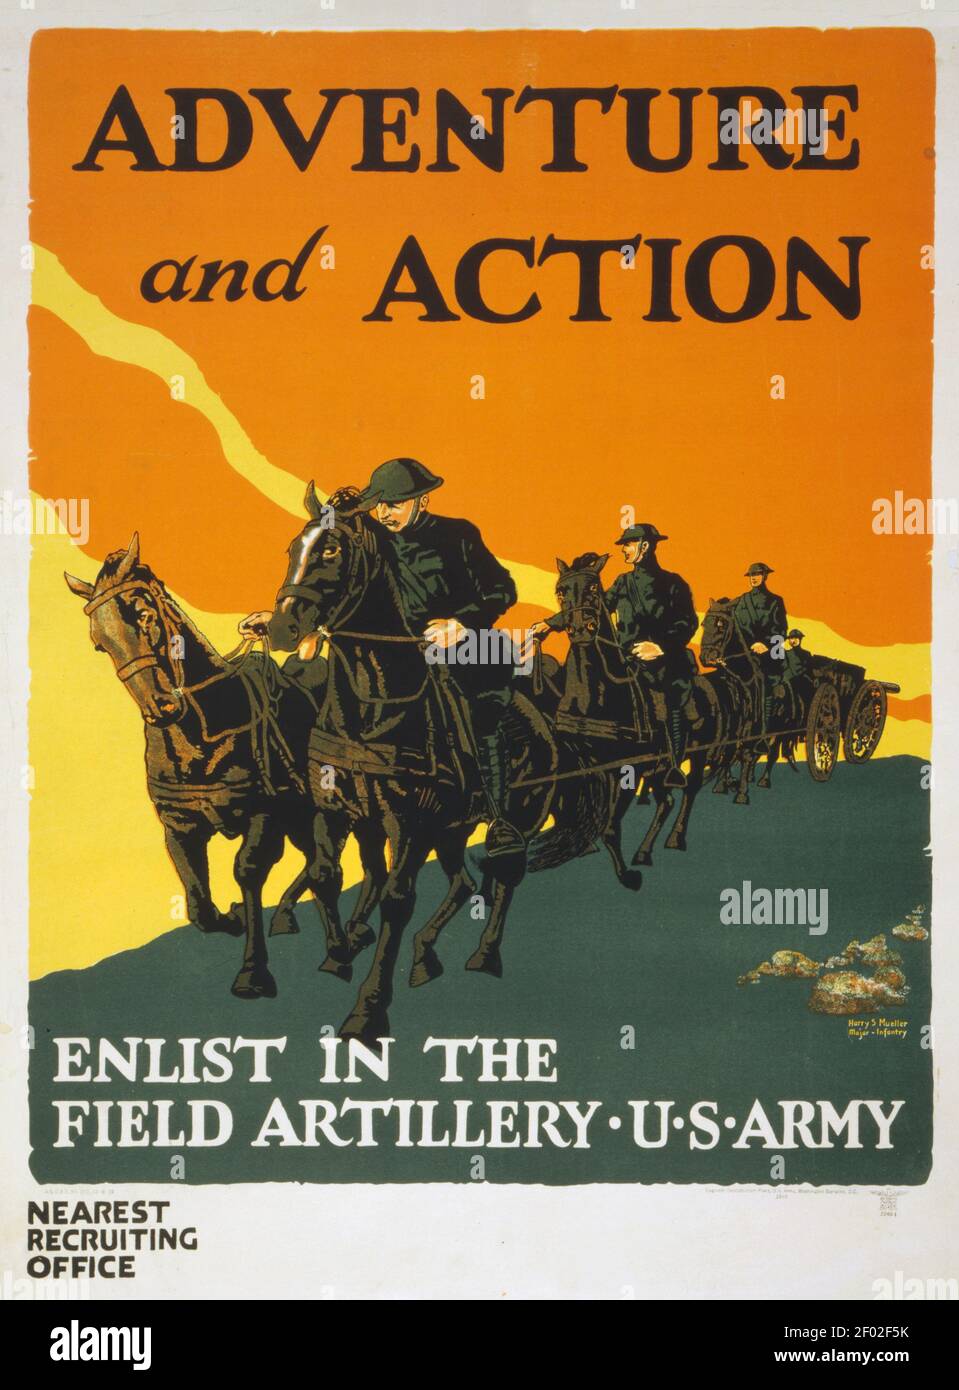 Army poster or ad. Adventure and Action. Enlist in the Field Artillery. U.S. Army. Stock Photo